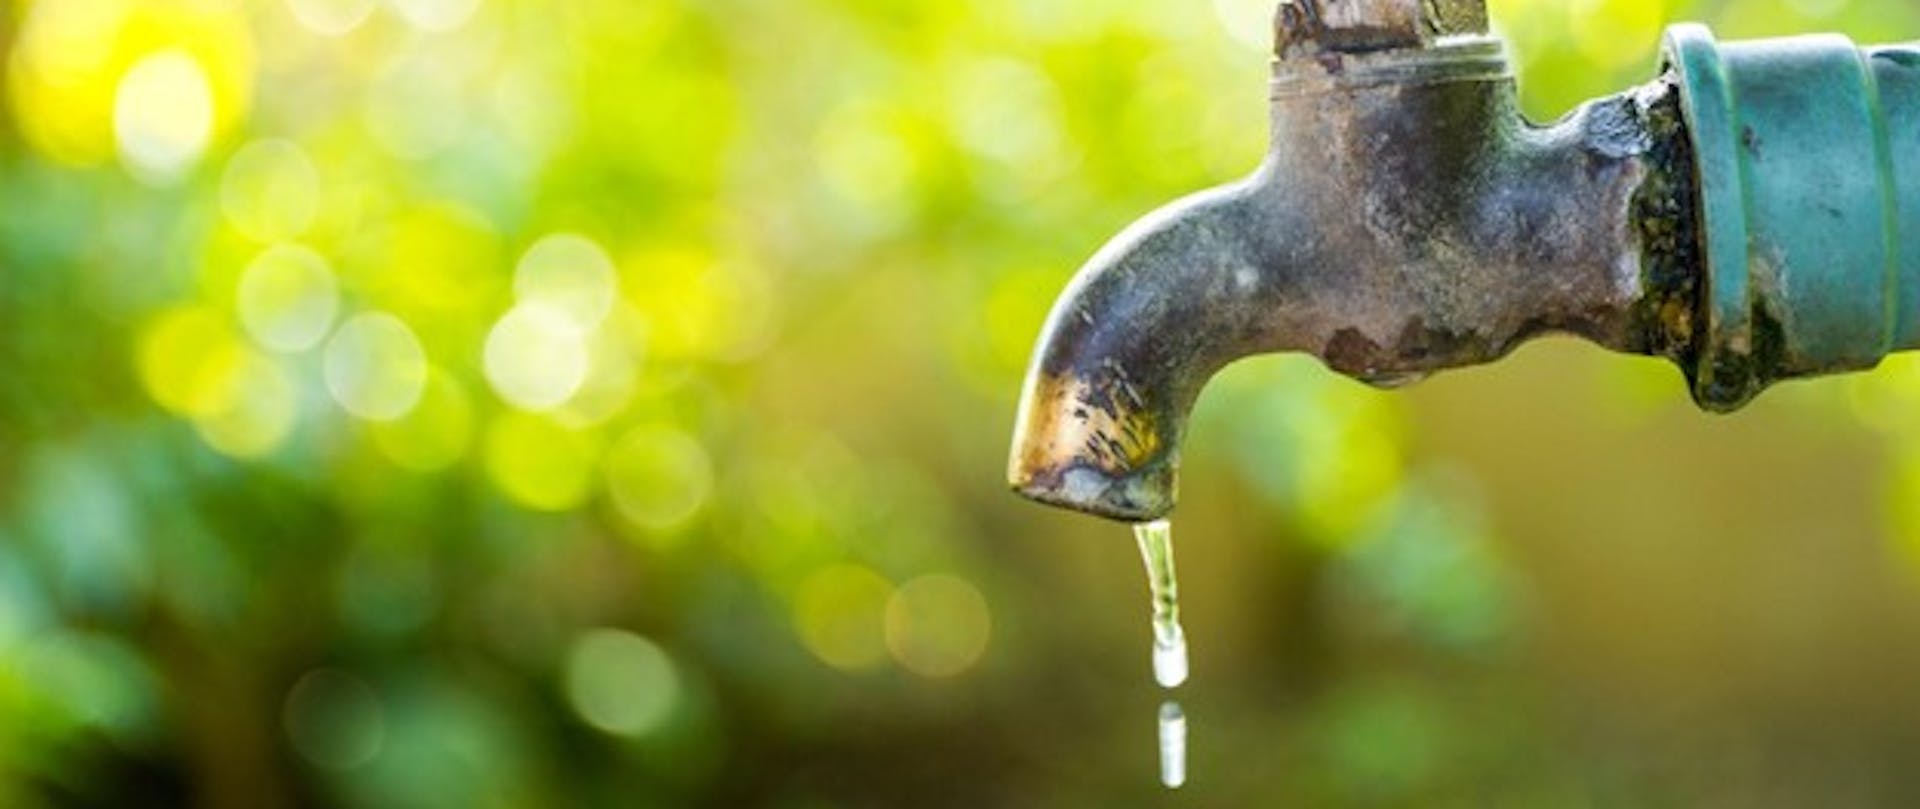 Water Conservation Demonstrated With Leaky Faucet Outdoors